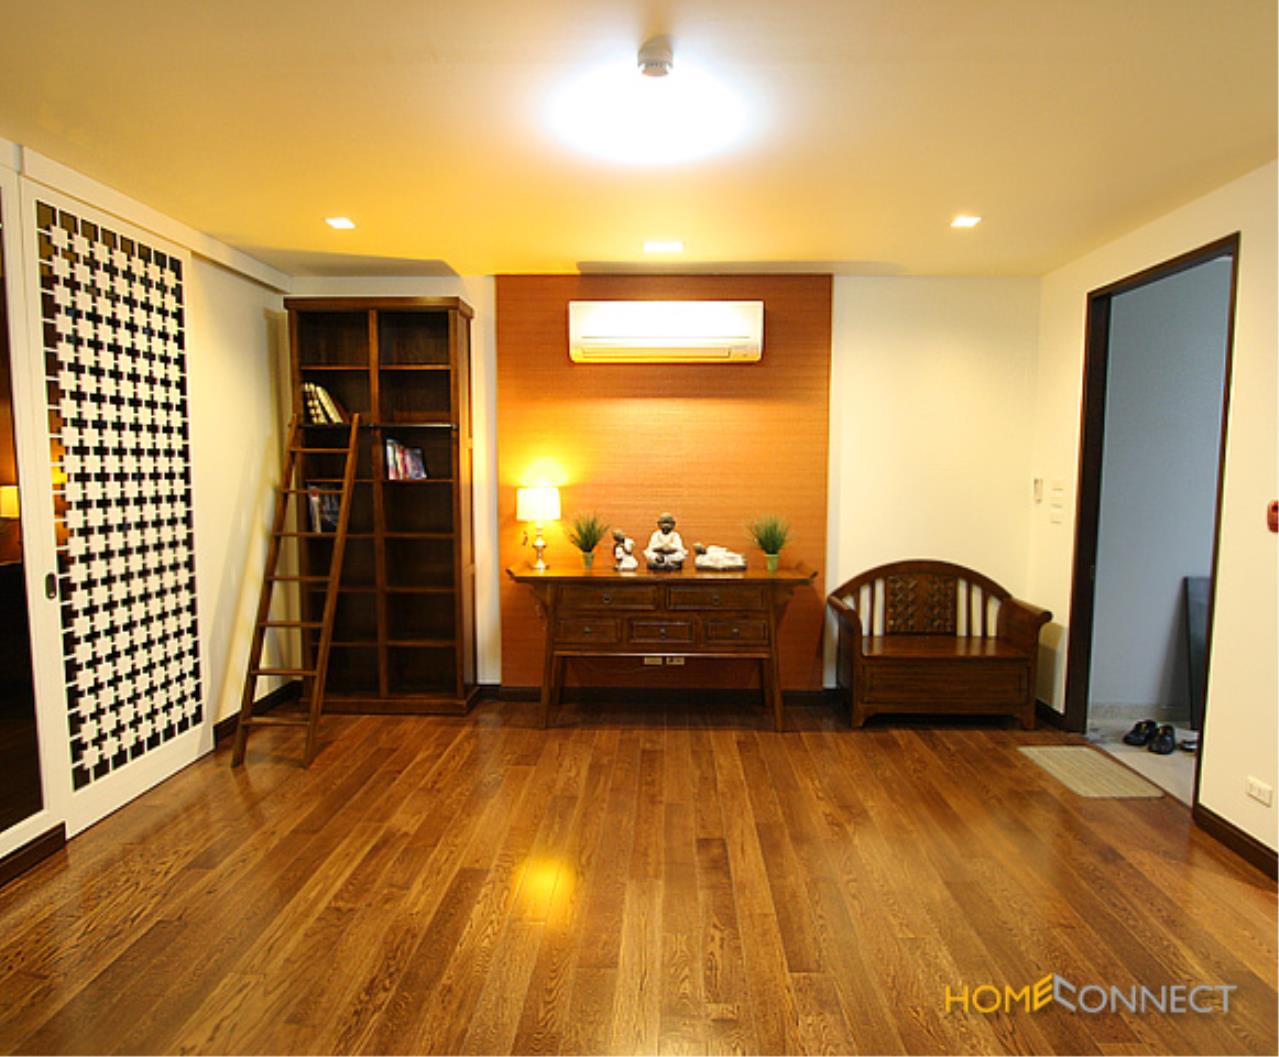 Home Connect Thailand Agency's House in Compound for Rent in Ekamai area 17